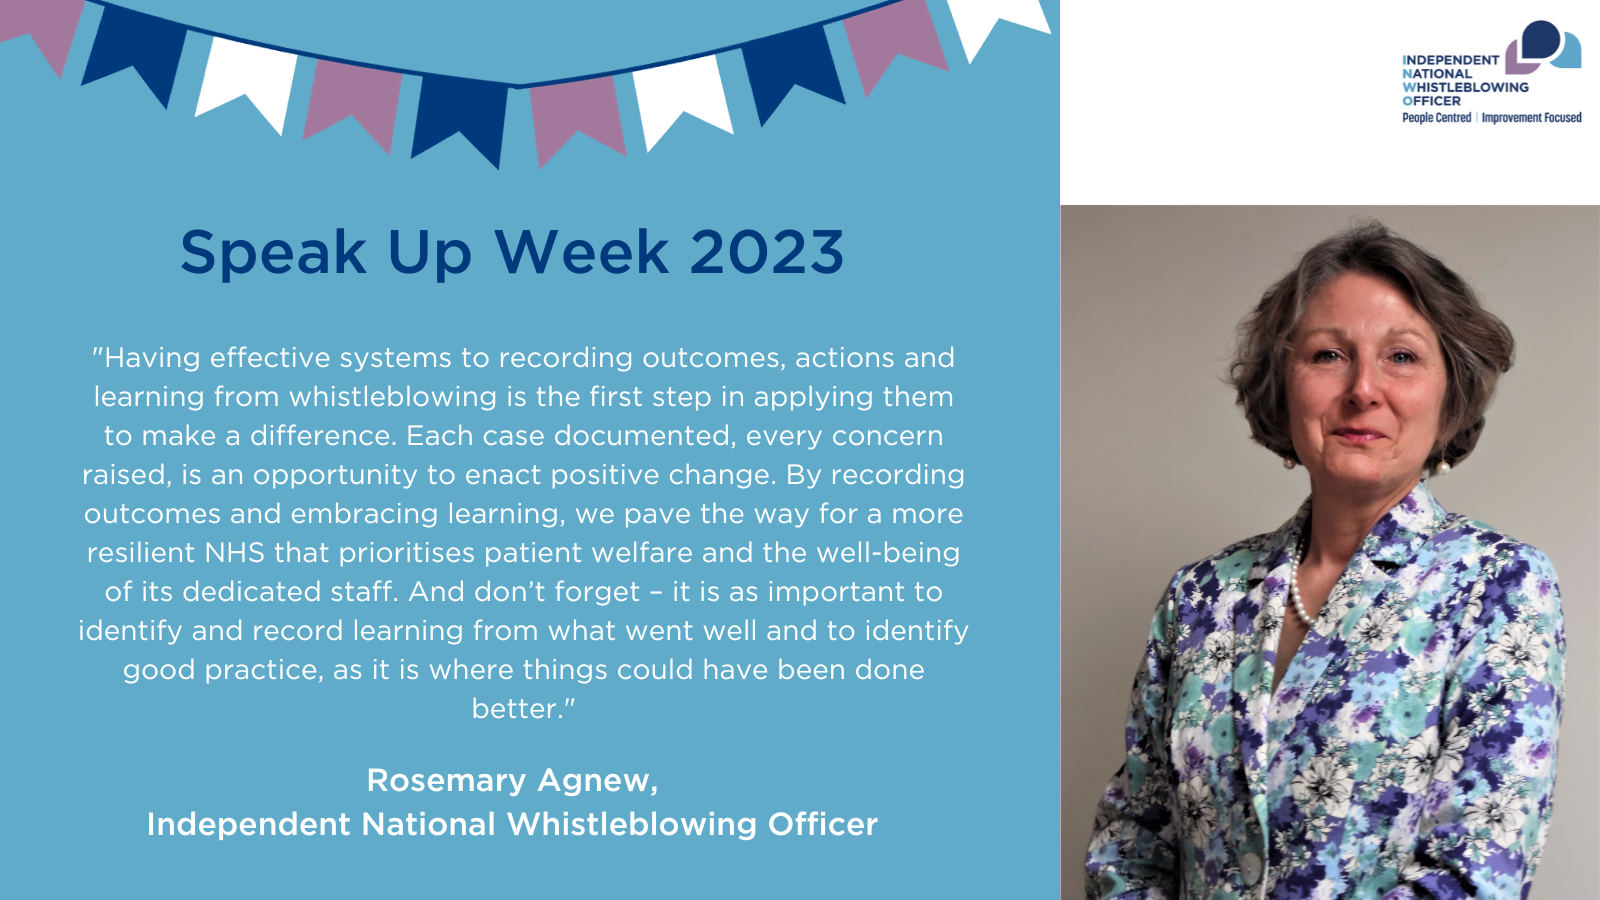 A statement from the INWO, Rosemary Agnew: Having effective systems to recording outcomes, actions and learning from whistleblowing is the first step in applying them to make a difference.  Each case documented, every concern raised, is an opportunity to enact positive change. By recording outcomes and embracing learning, we pave the way for a more resilient NHS that prioritises patient welfare and the well-being of its dedicated staff. And don’t forget – it is as important to identify and record learning from what went well and to identify good practice, as it is where things could have been done better.